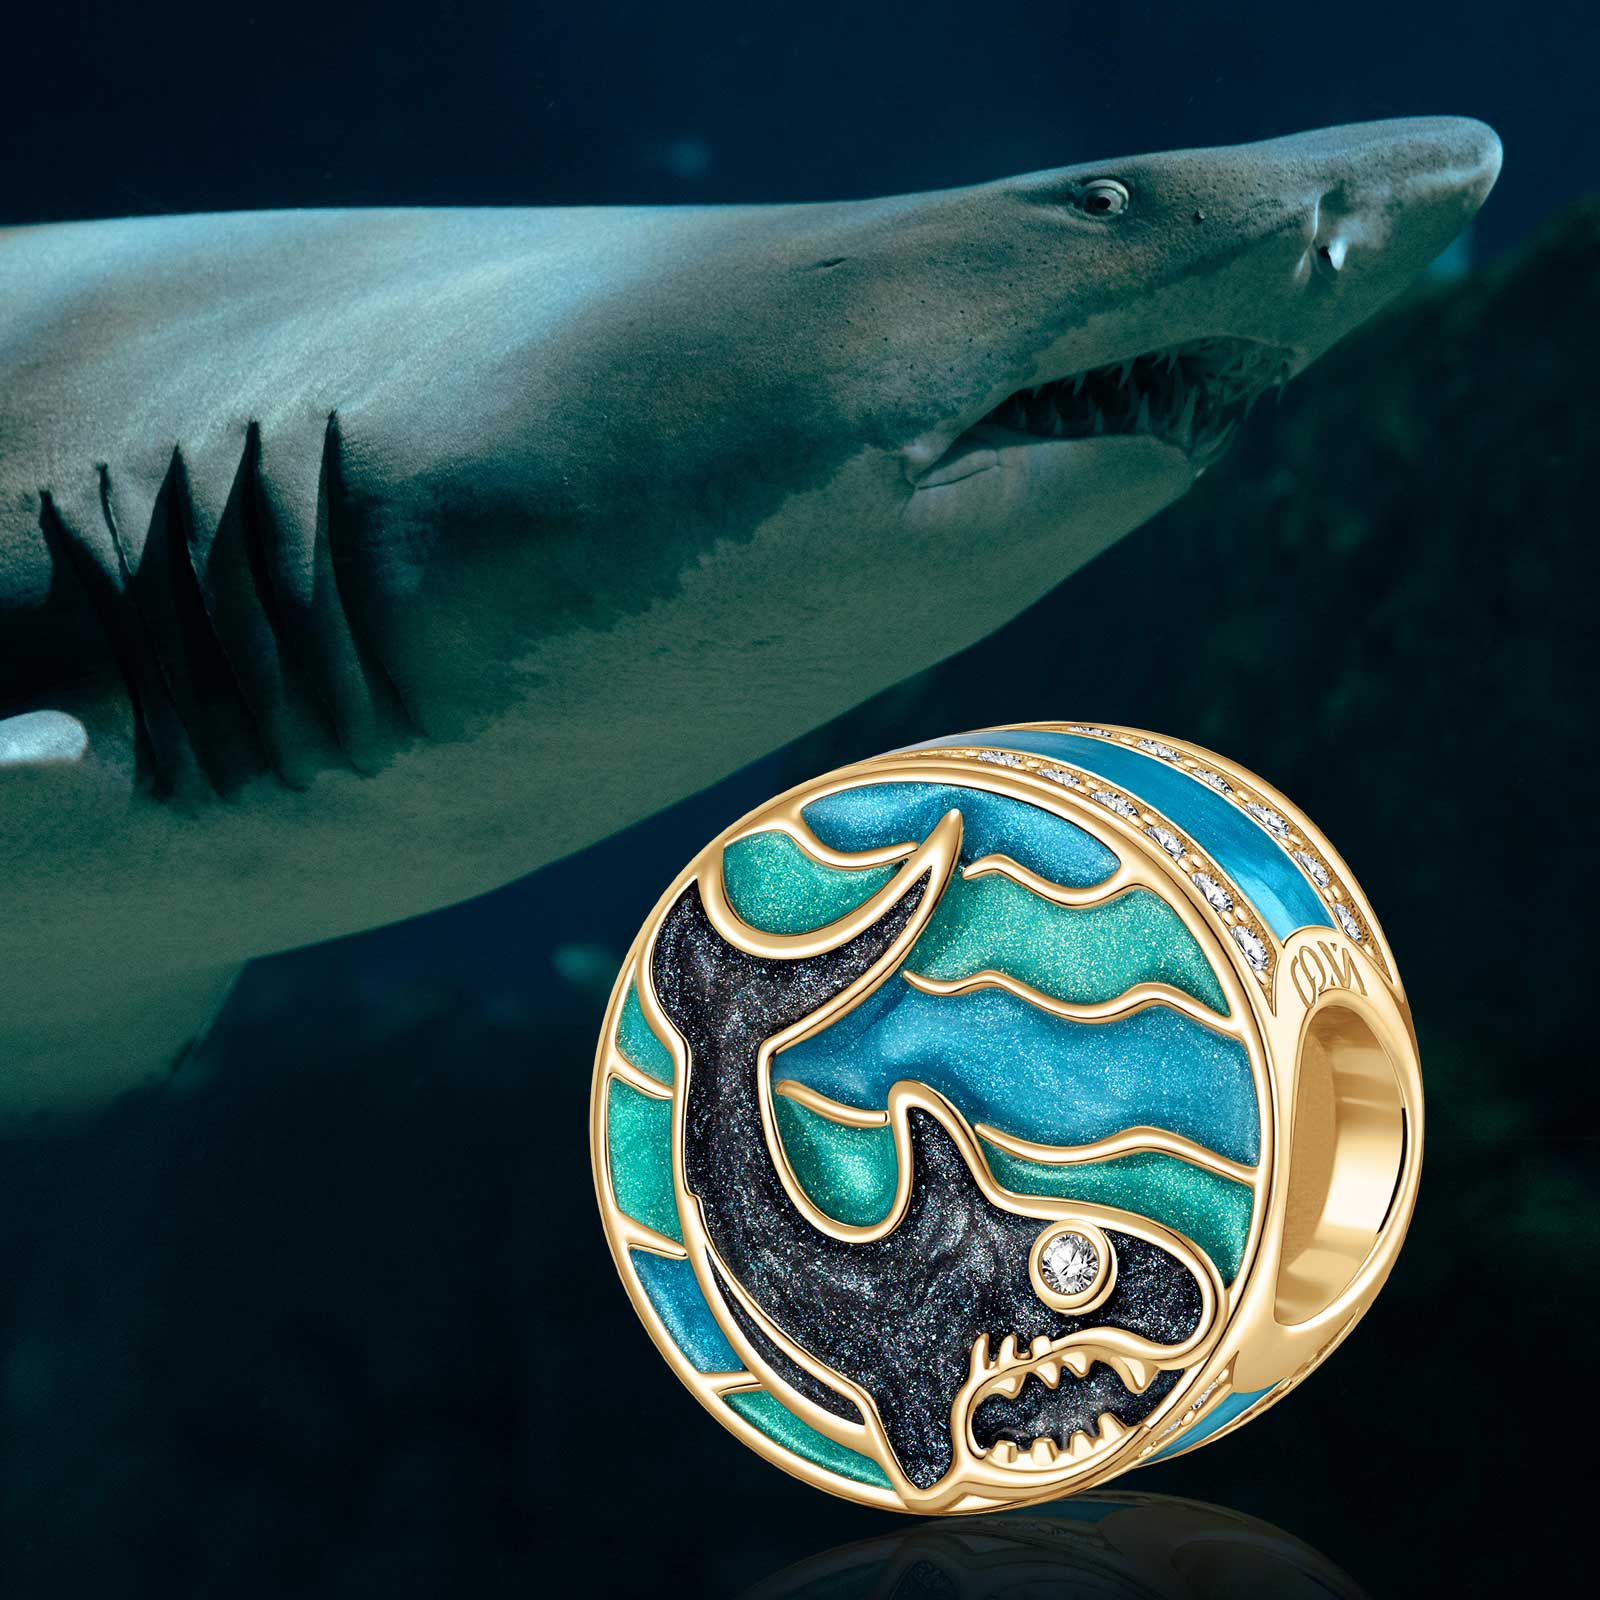 Black Shark Tarnish-resistant Silver Charms With Enamel In 14K Gold Plated